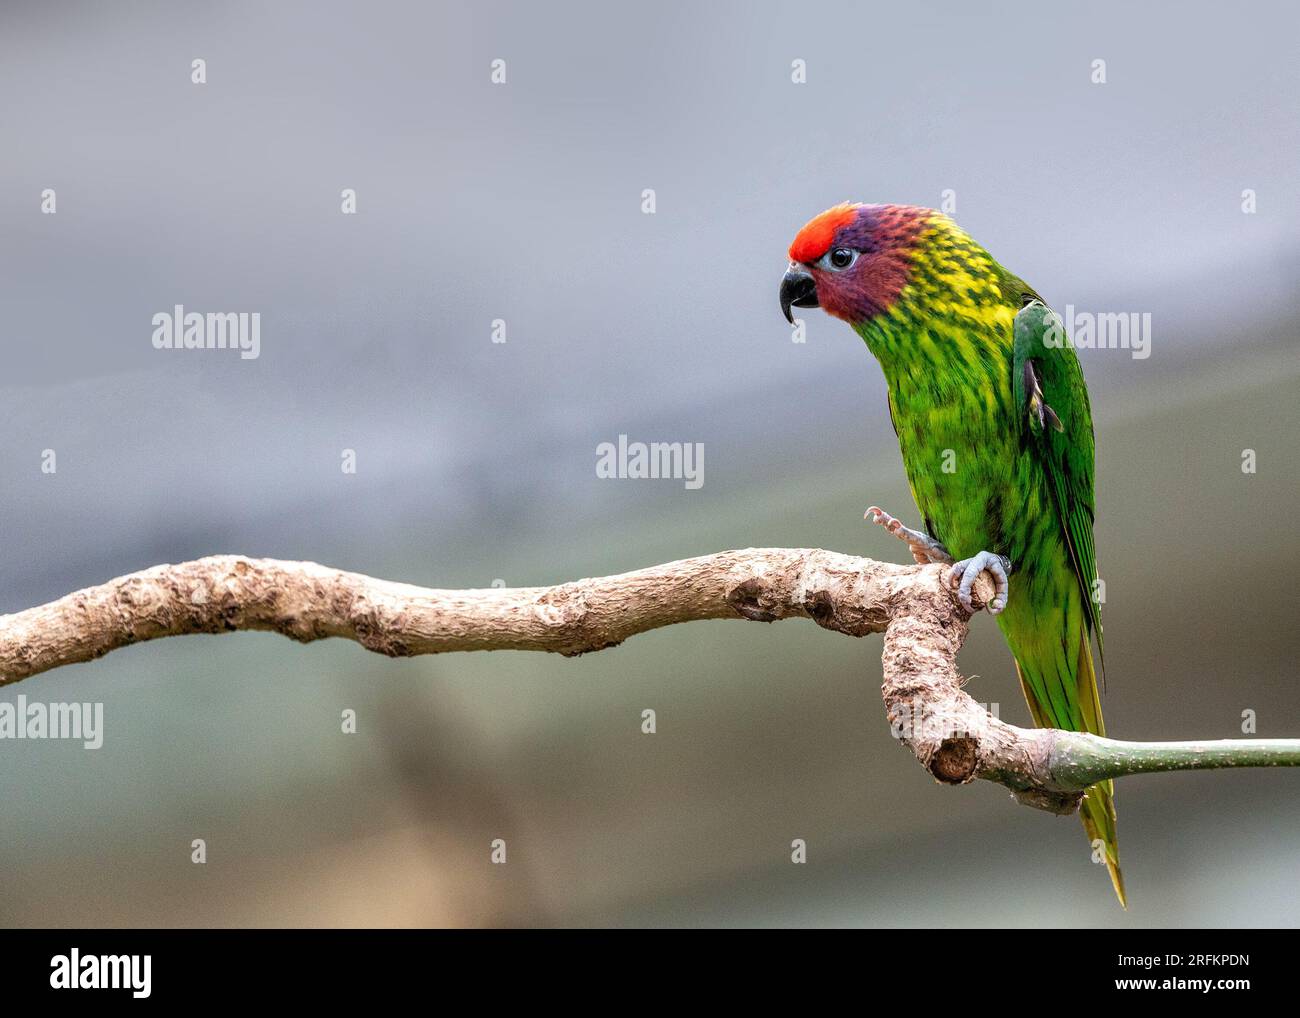 A striking Golden's Lorikeet (Trichoglossus goldiei) displaying its brilliant plumage. This dazzling parrot species is native to the rainforests of Pa Stock Photo